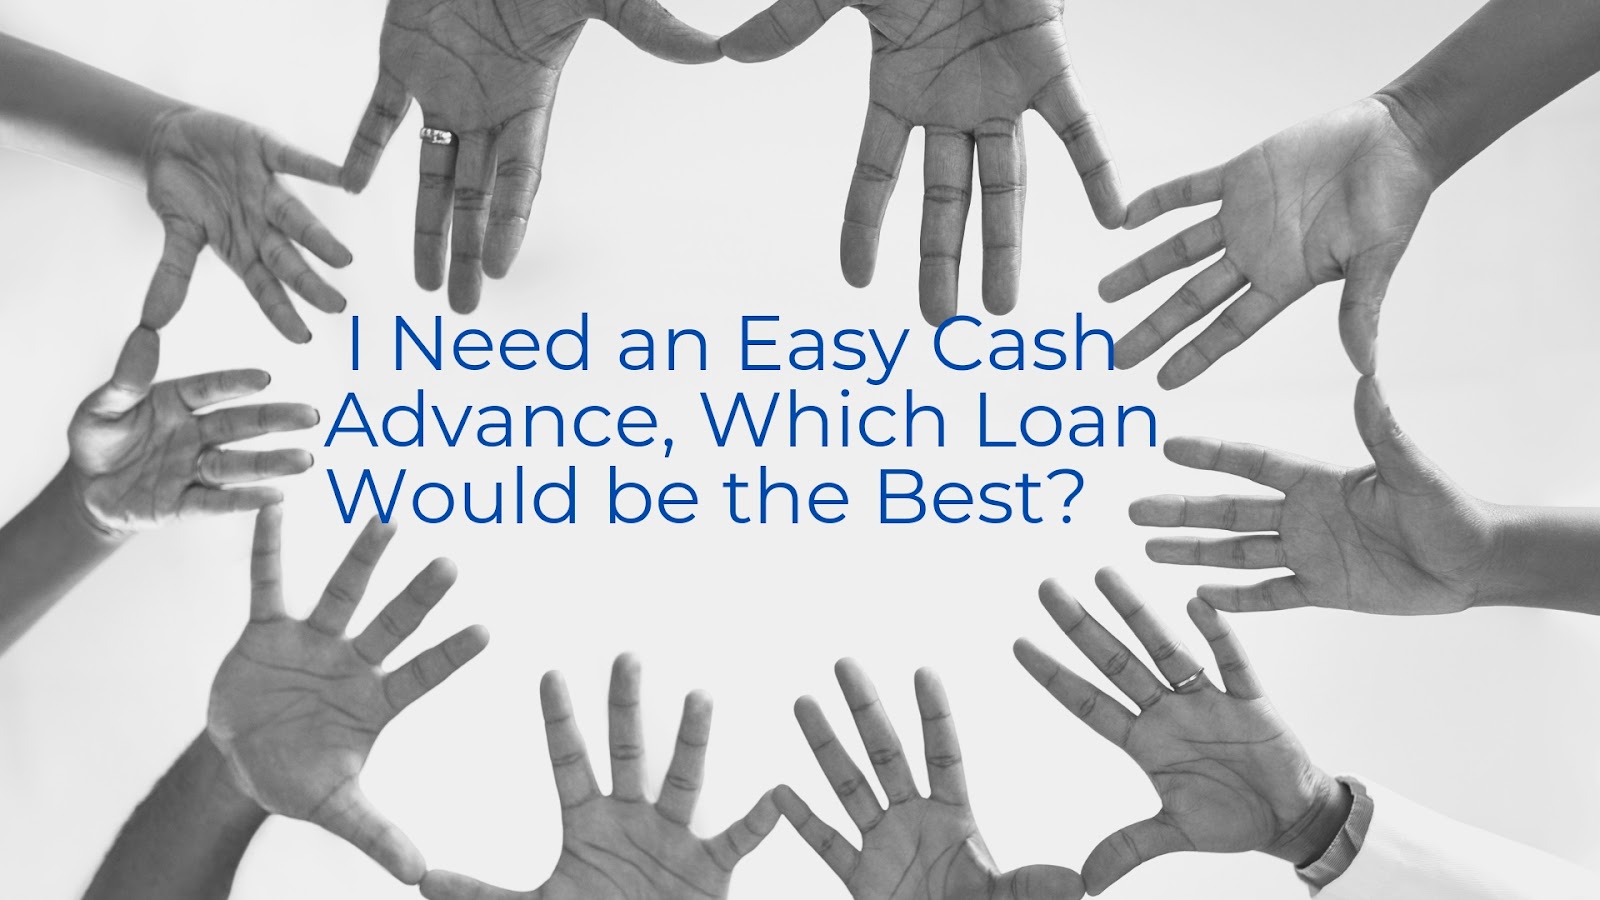 I Need an Easy Cash Advance, Which Loan Would be the Best?